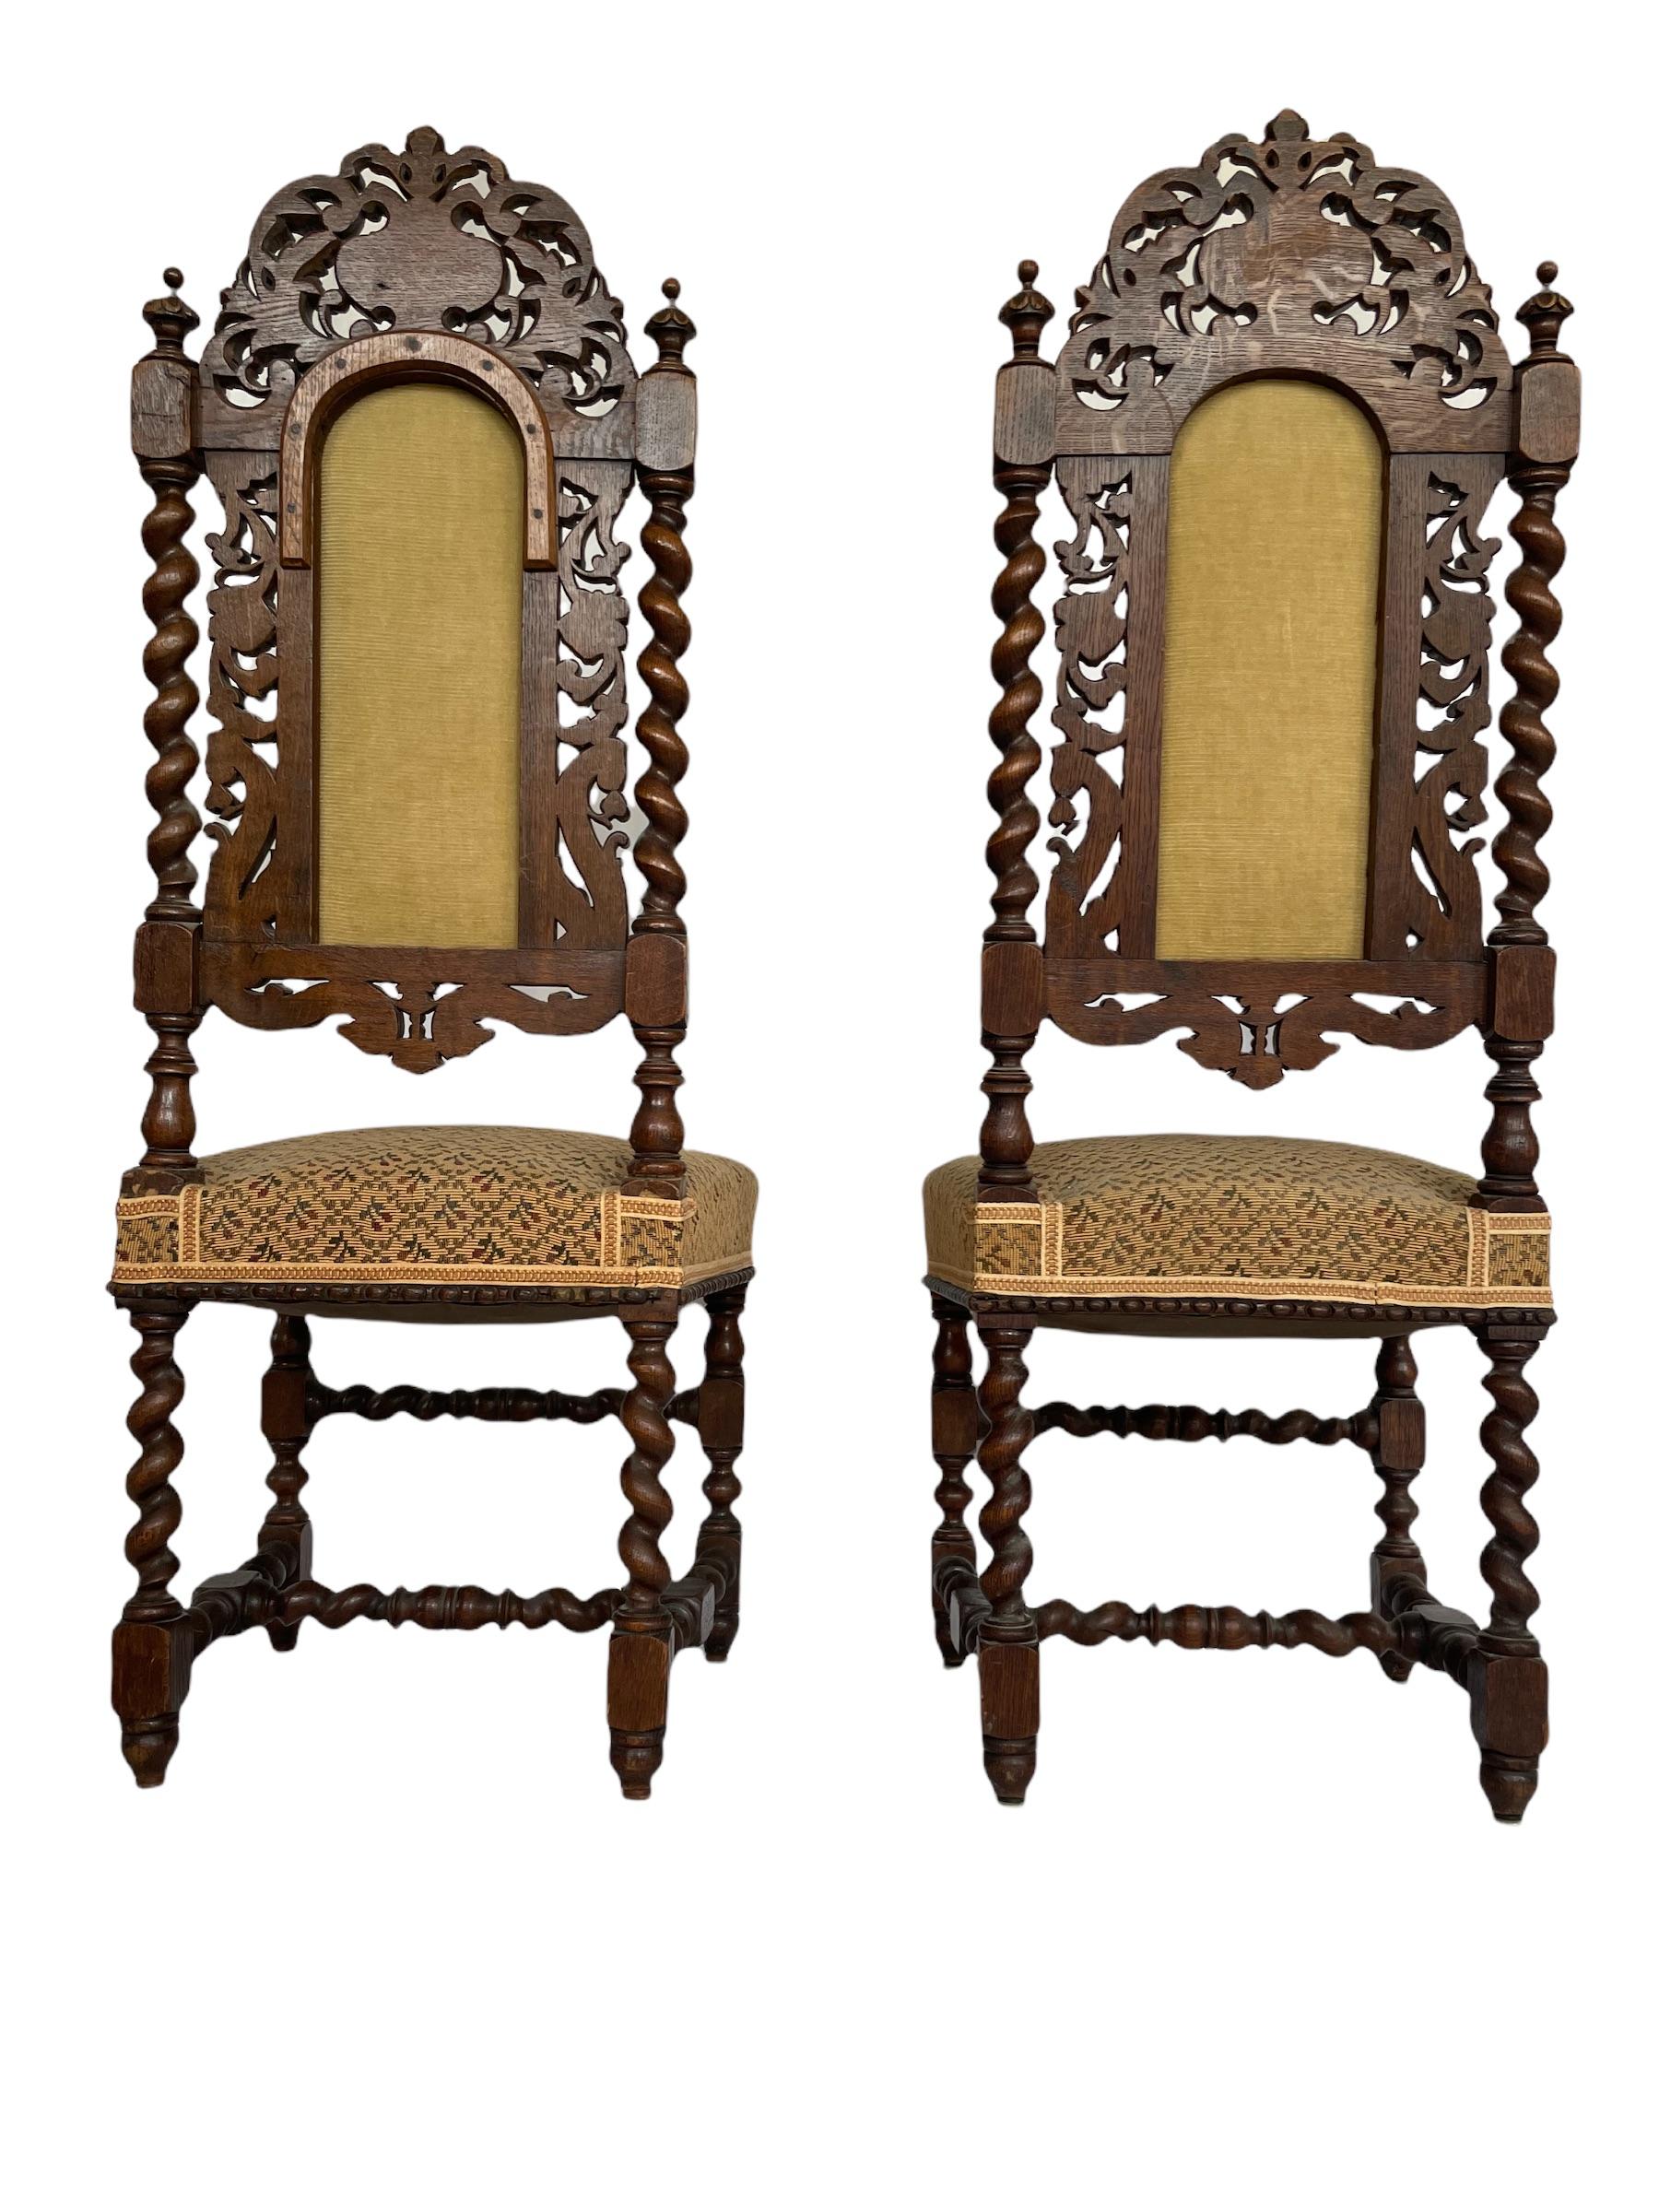 Beautiful pair of richly carved Renaissance-style chairs from the 19th French period.